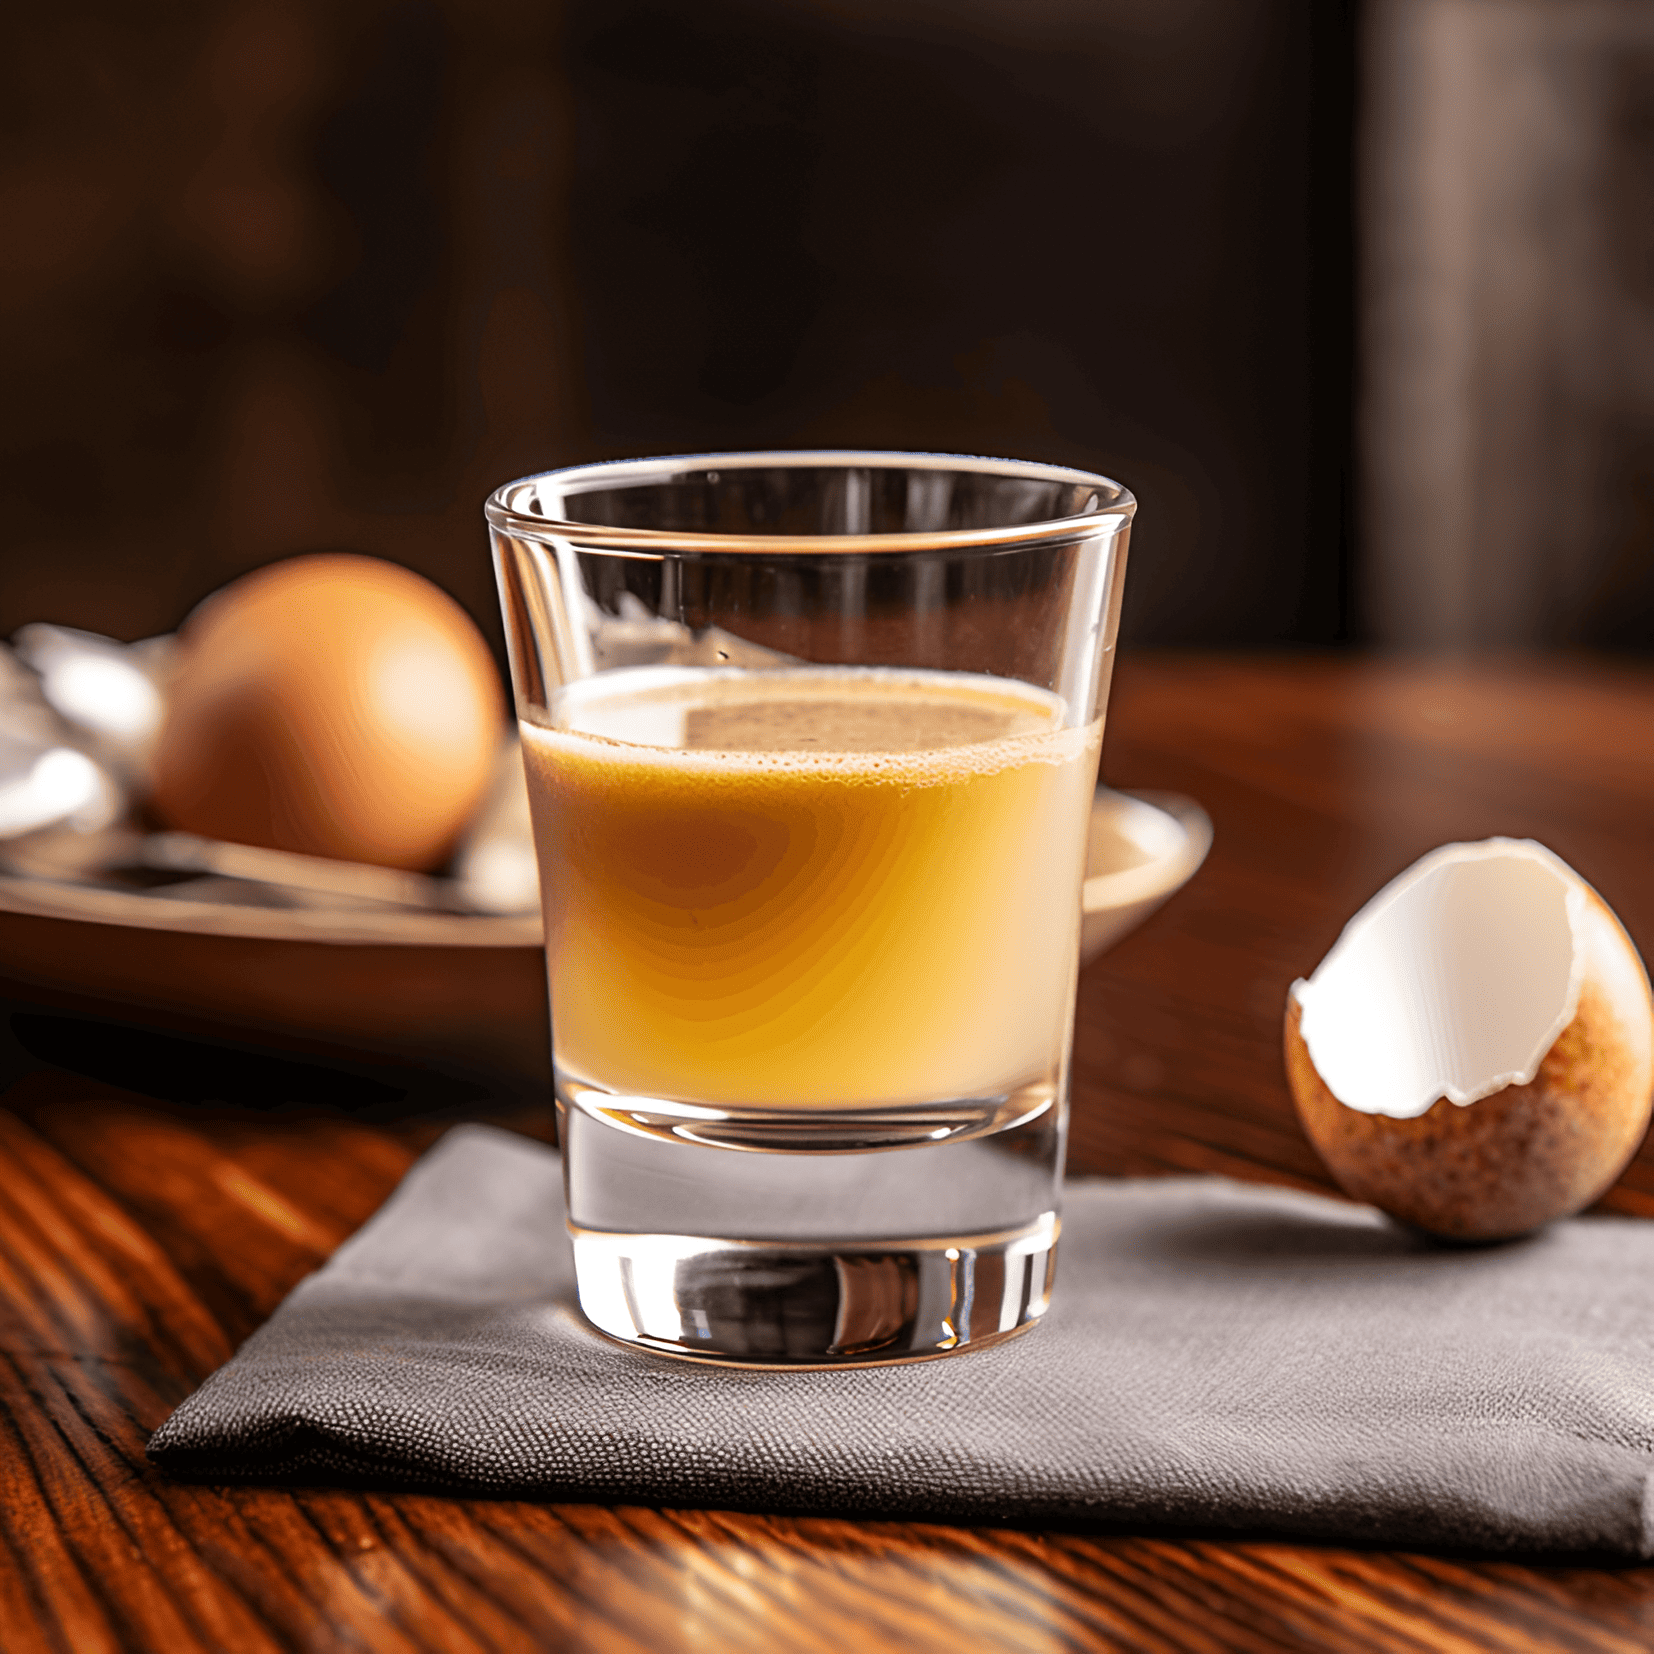 The Prairie Oyster cocktail is a savory, rich, and slightly spicy drink with a unique texture. The combination of the raw egg yolk, Worcestershire sauce, and hot sauce creates a velvety and bold flavor profile that is both satisfying and invigorating.